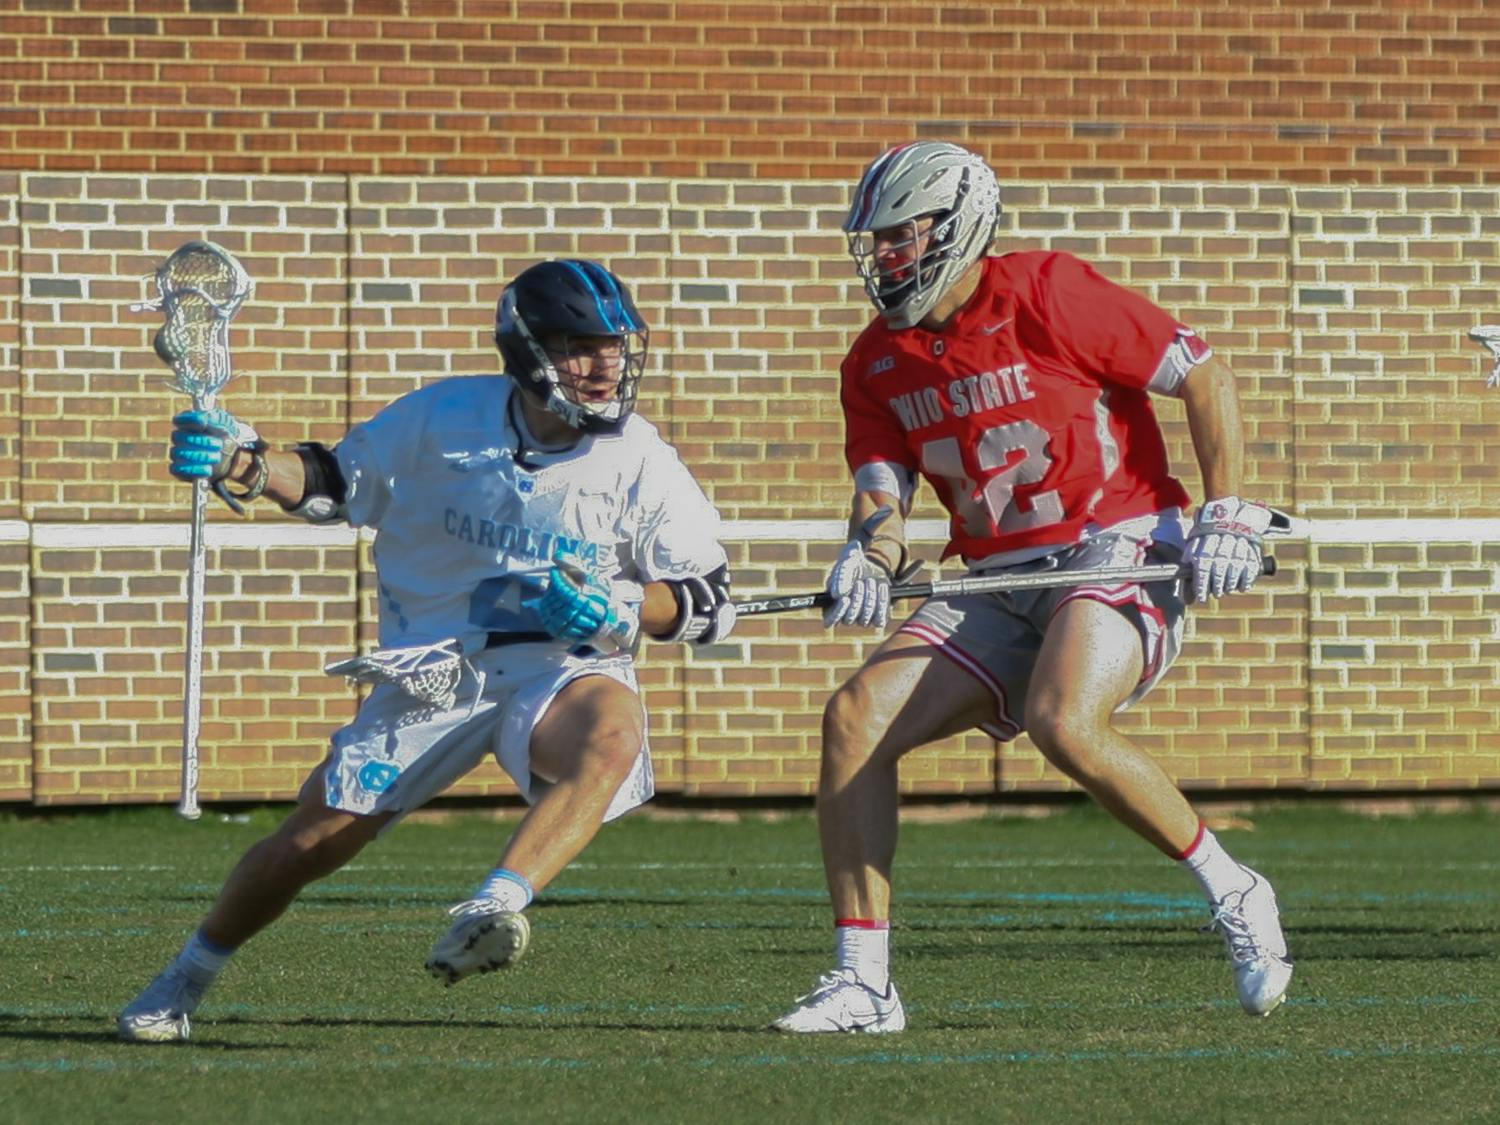 UNC graduate attacker Chris Gray (4) maintains possession during a home men's lacrosse game against Ohio State on Saturday, Feb. 19, 2022. UNC lost 20-8.